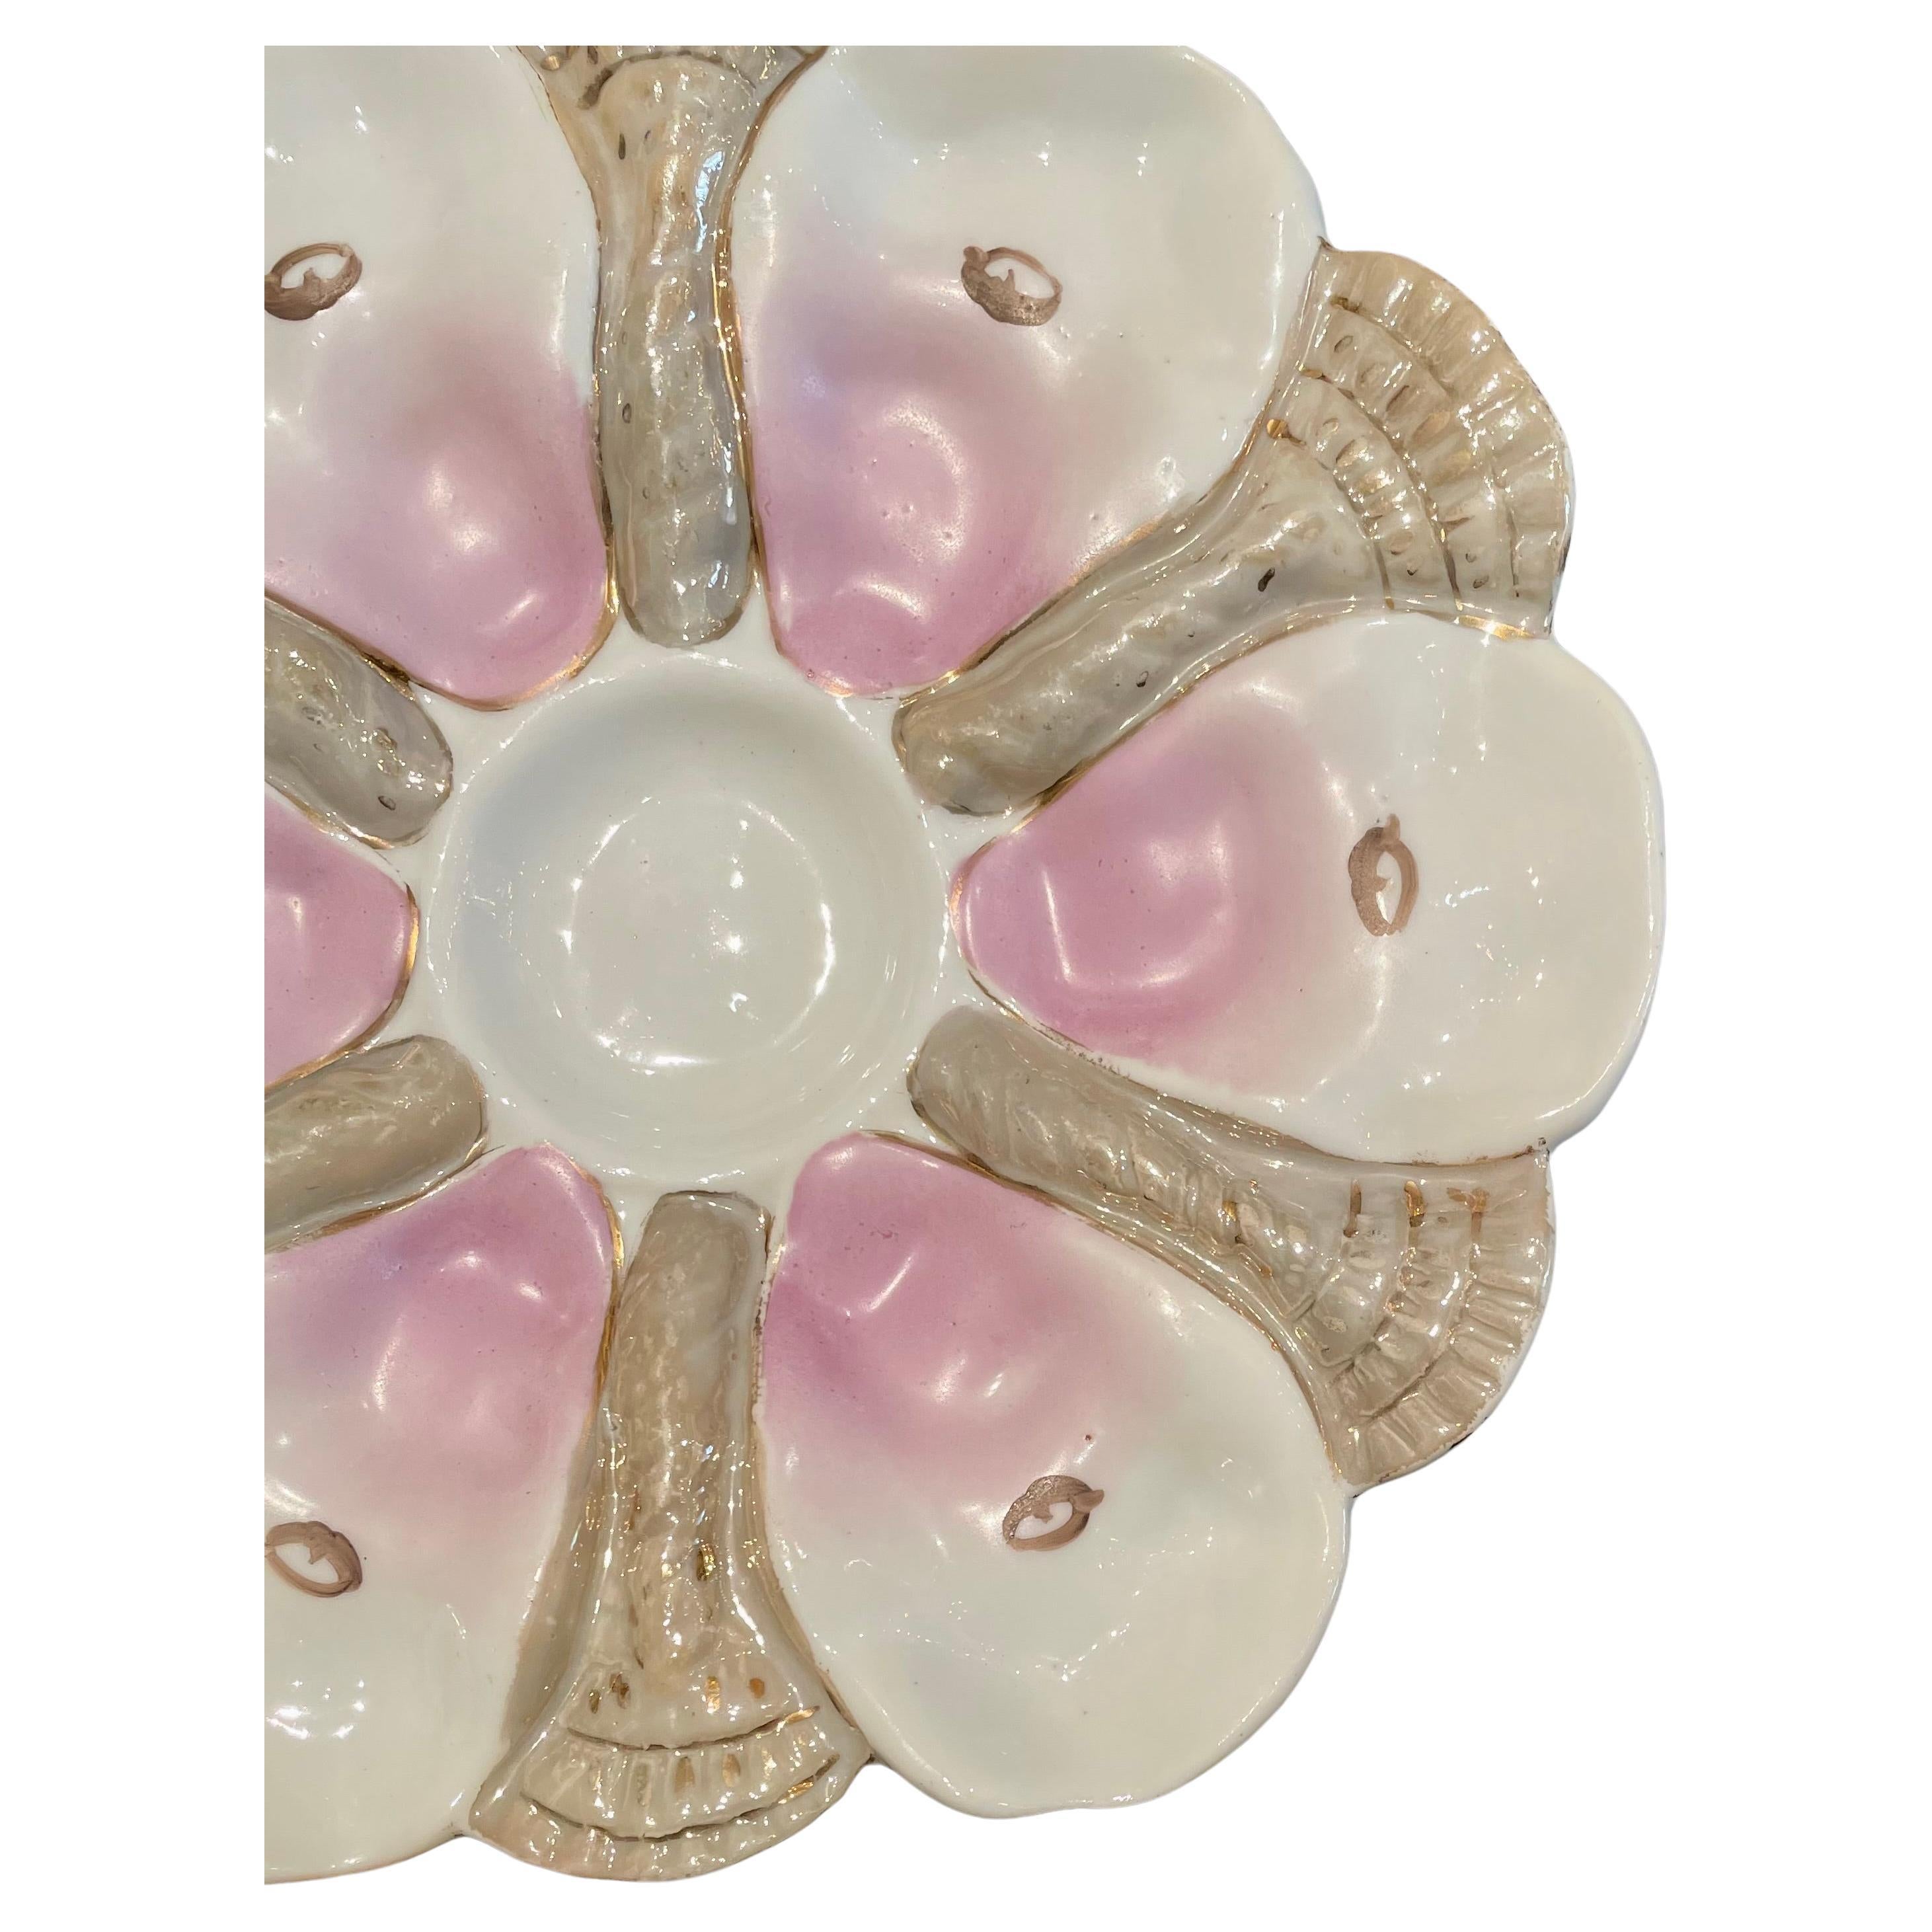 Antique German porcelain oyster plate, circa 1880-1890.
A handsome shaped oyster plate hand painted pink and taupe on a white background.